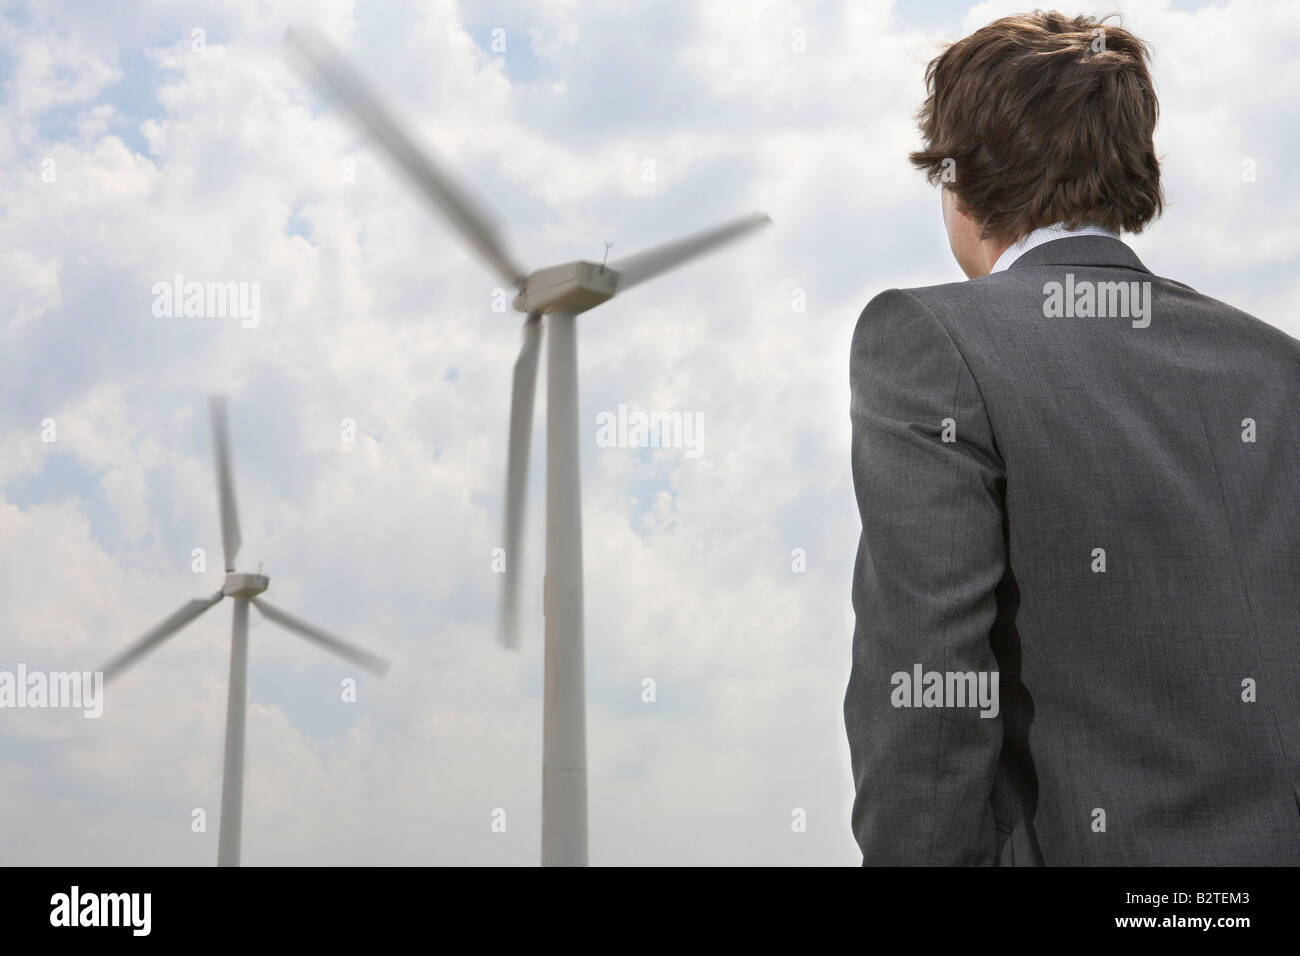 Businessman looking at wind turbines Banque D'Images